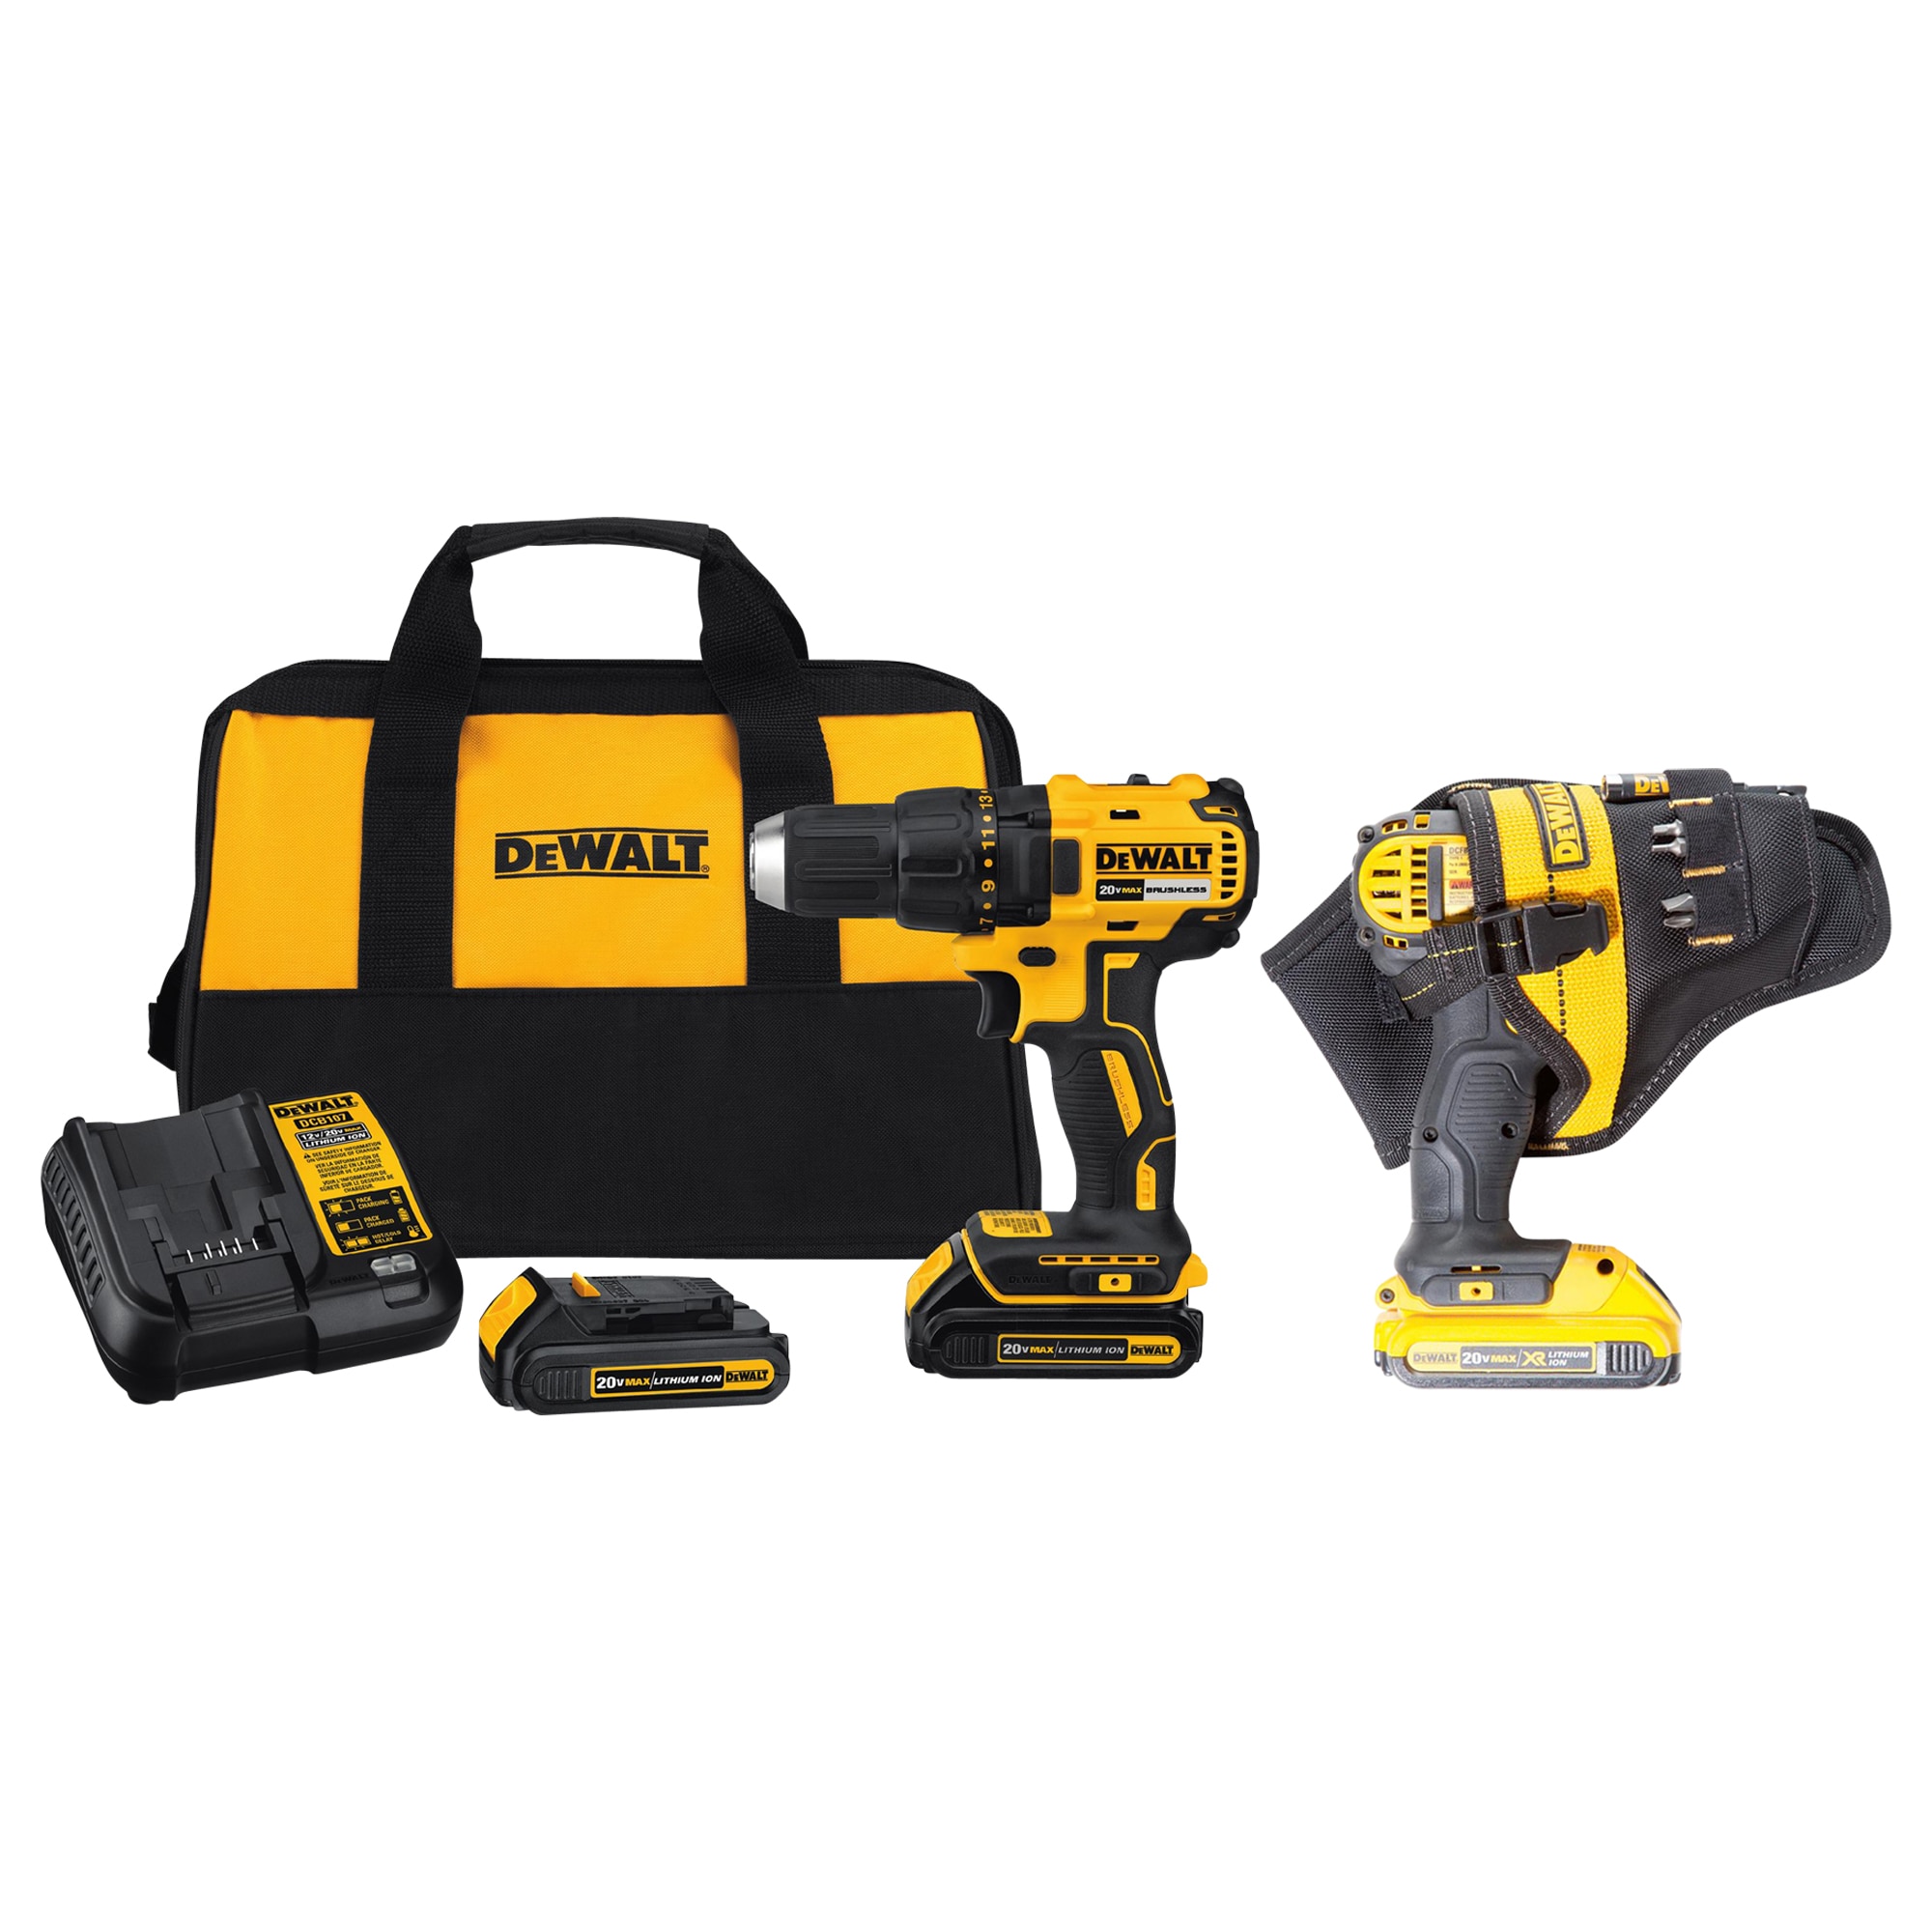 Shop DEWALT 20-volt Max 1/2-in Brushless Cordless Drill (2-Batteries  Included and Charger Included)  Polyester Drill Holder at